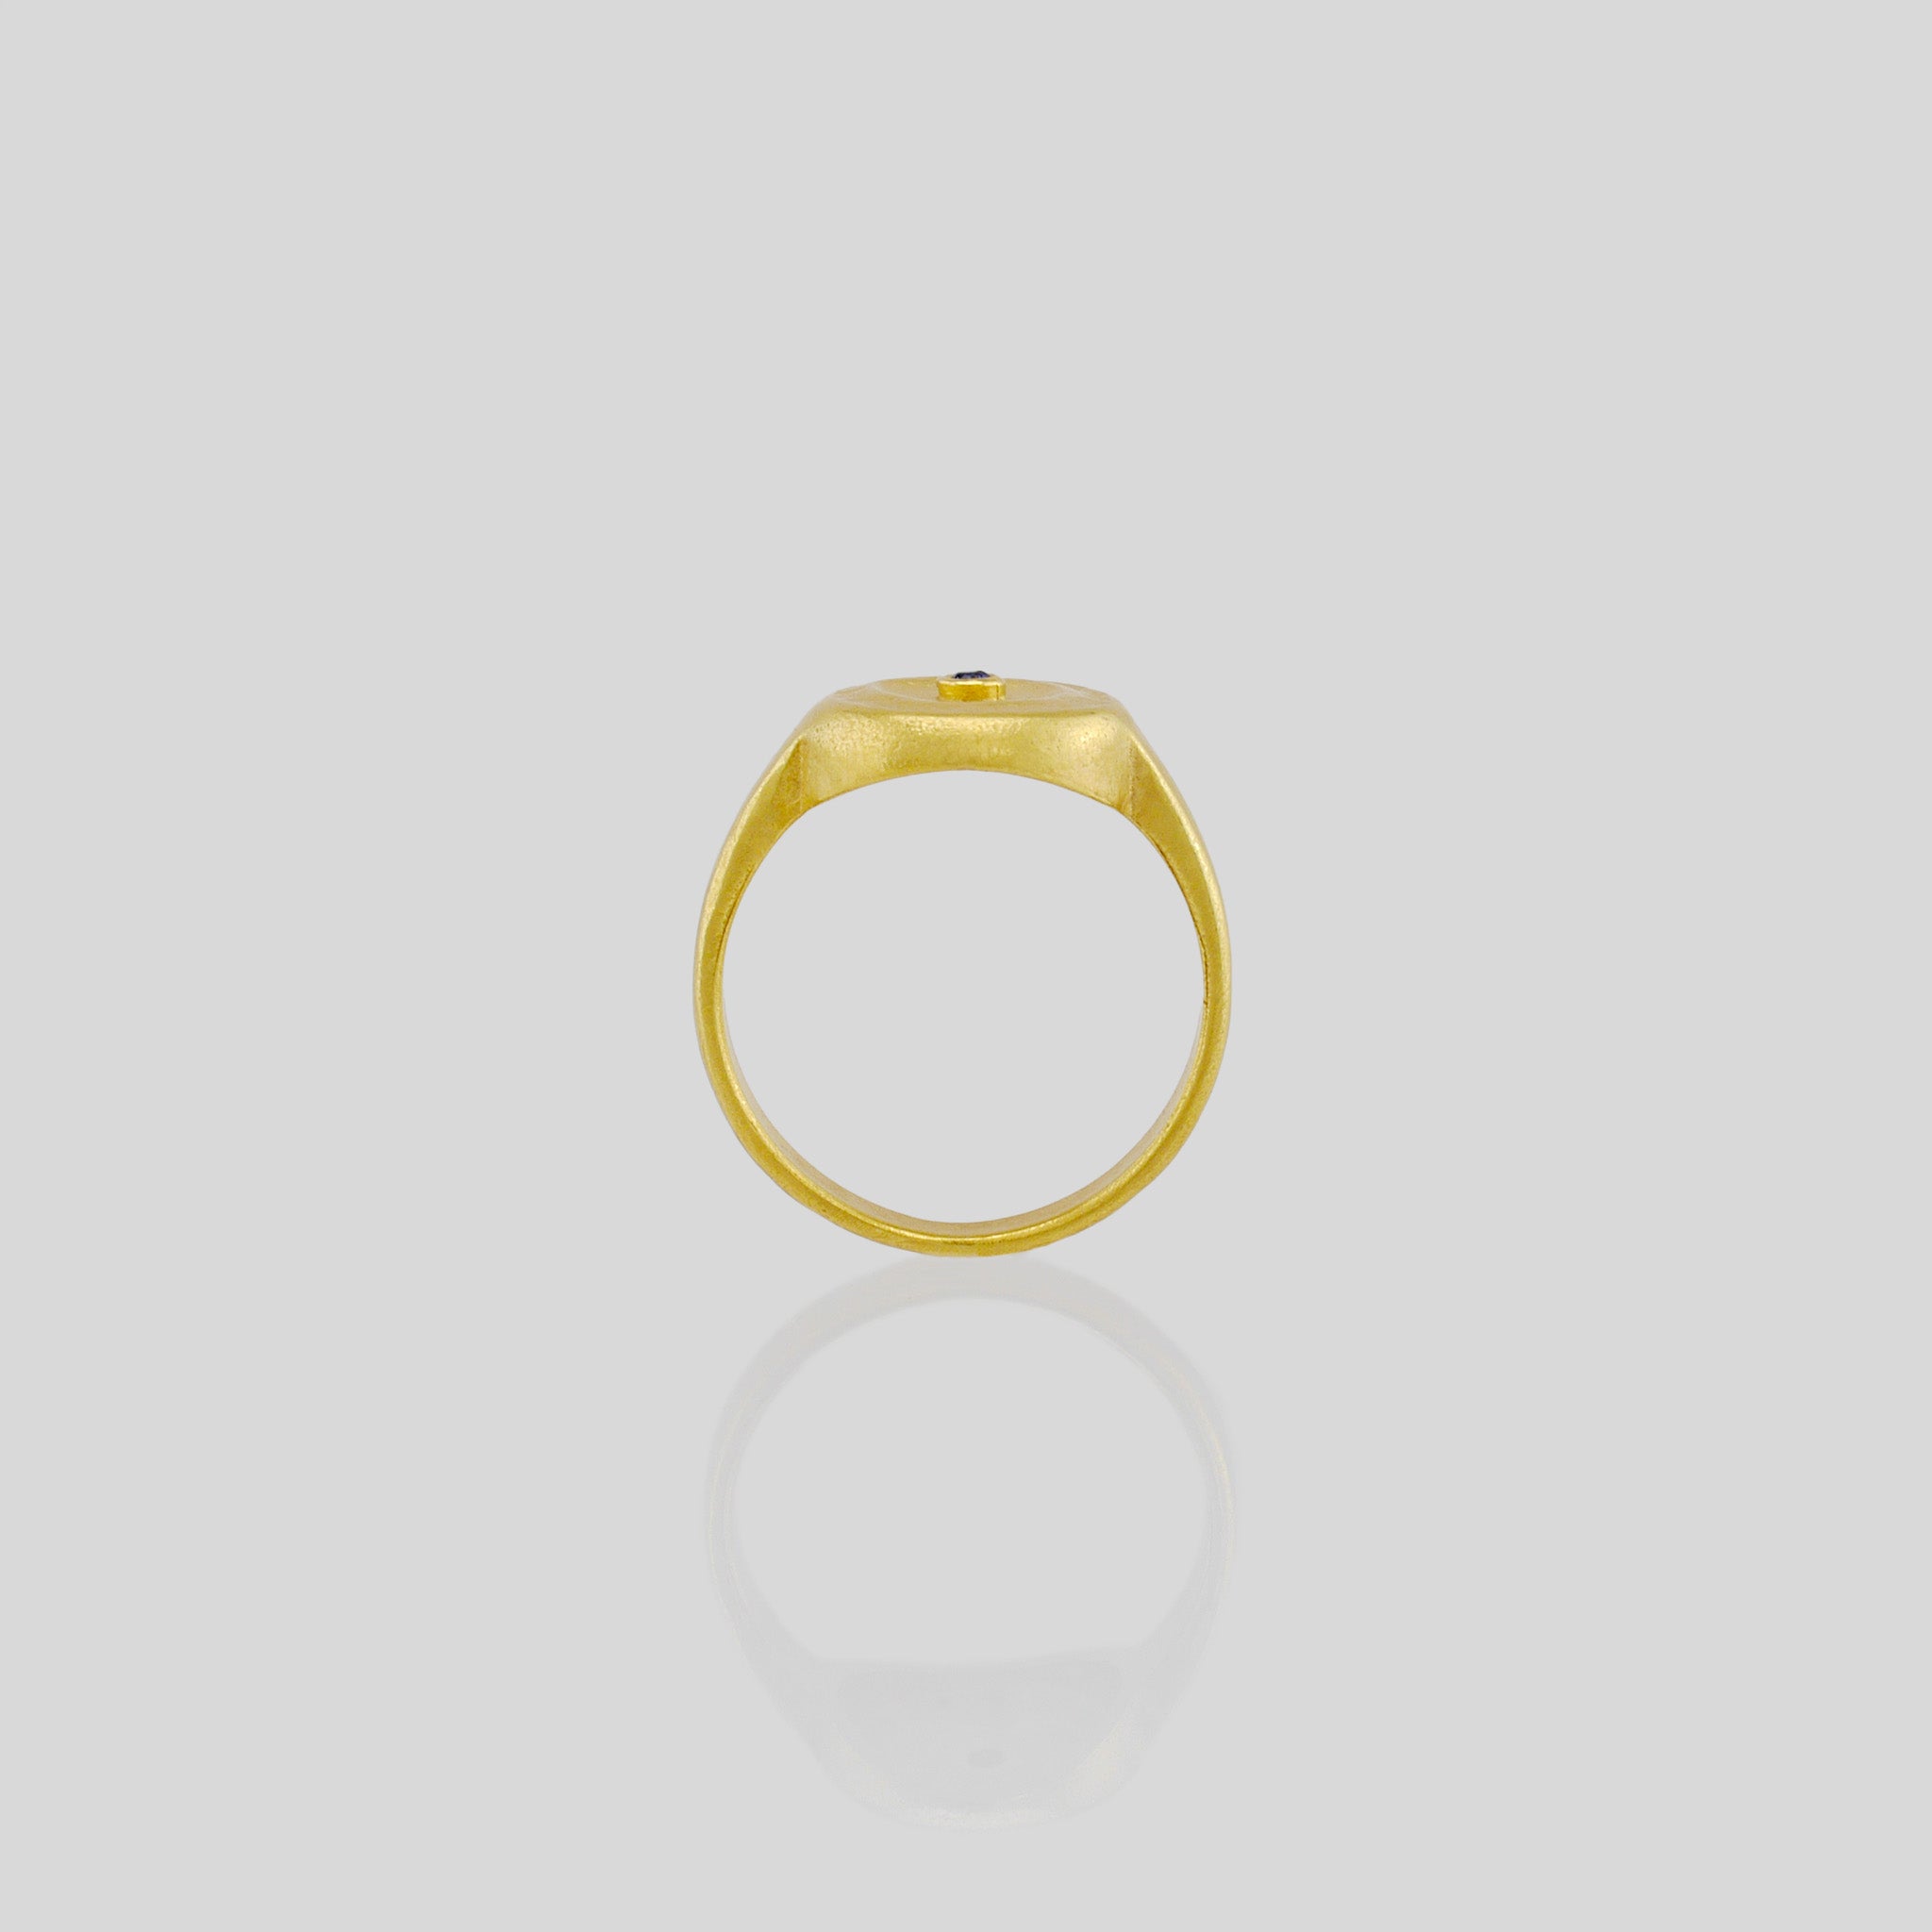 Side view of Handmade 18k Gold ring with a central Sapphire, exuding vintage charm reminiscent of the Egyptian pharaohs' era.